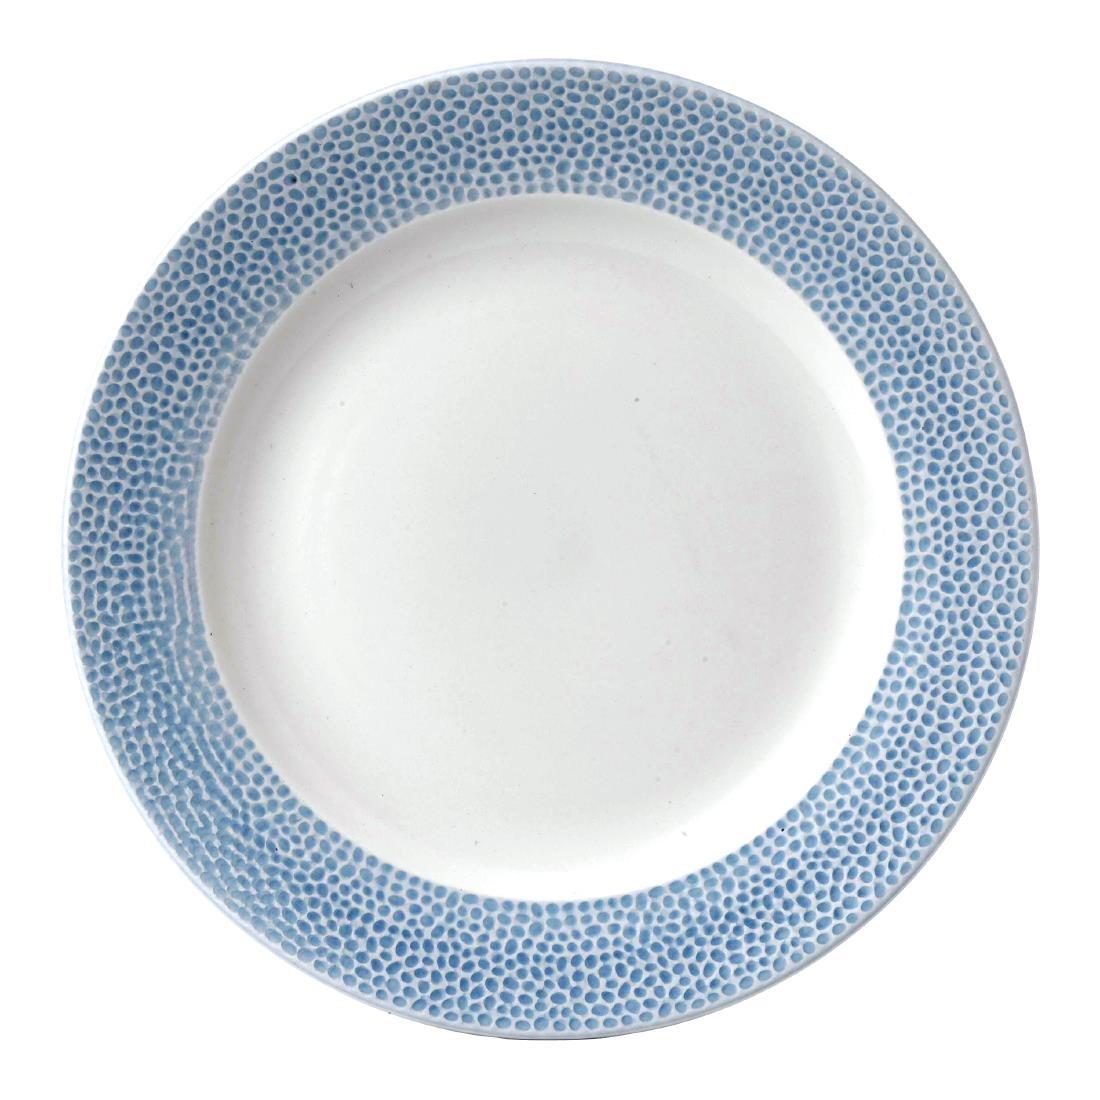 Churchill Isla Spinwash Ocean Blue Profile Footed Plate 260mm (Pack of 12) - FD835  - 1